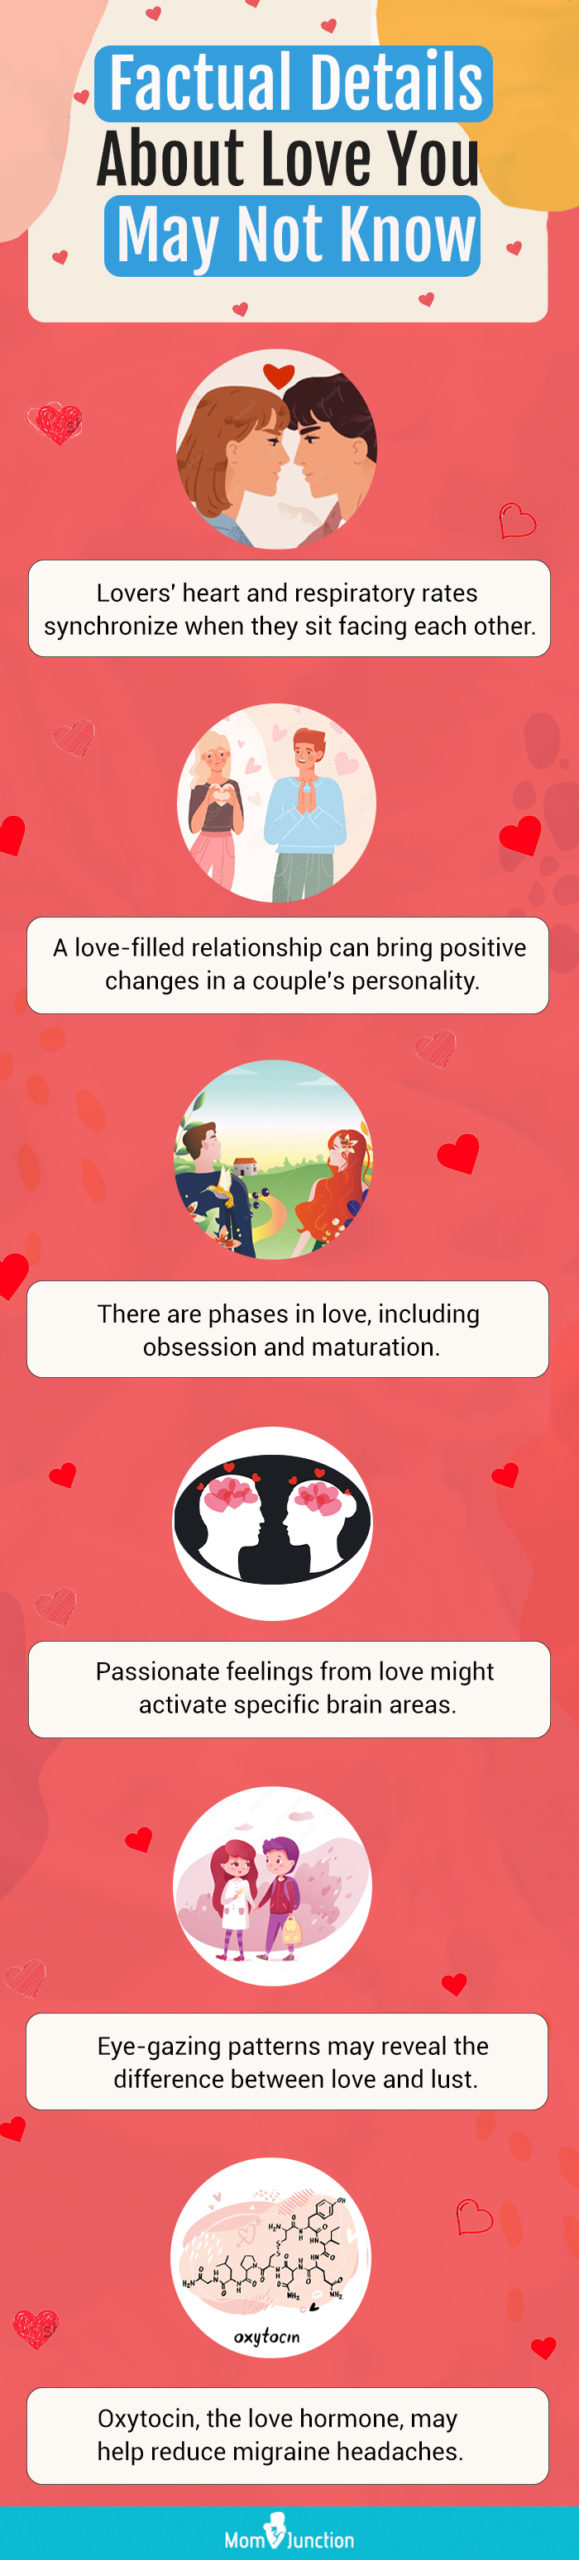 20 Interesting Facts About Love That Might Surprise You